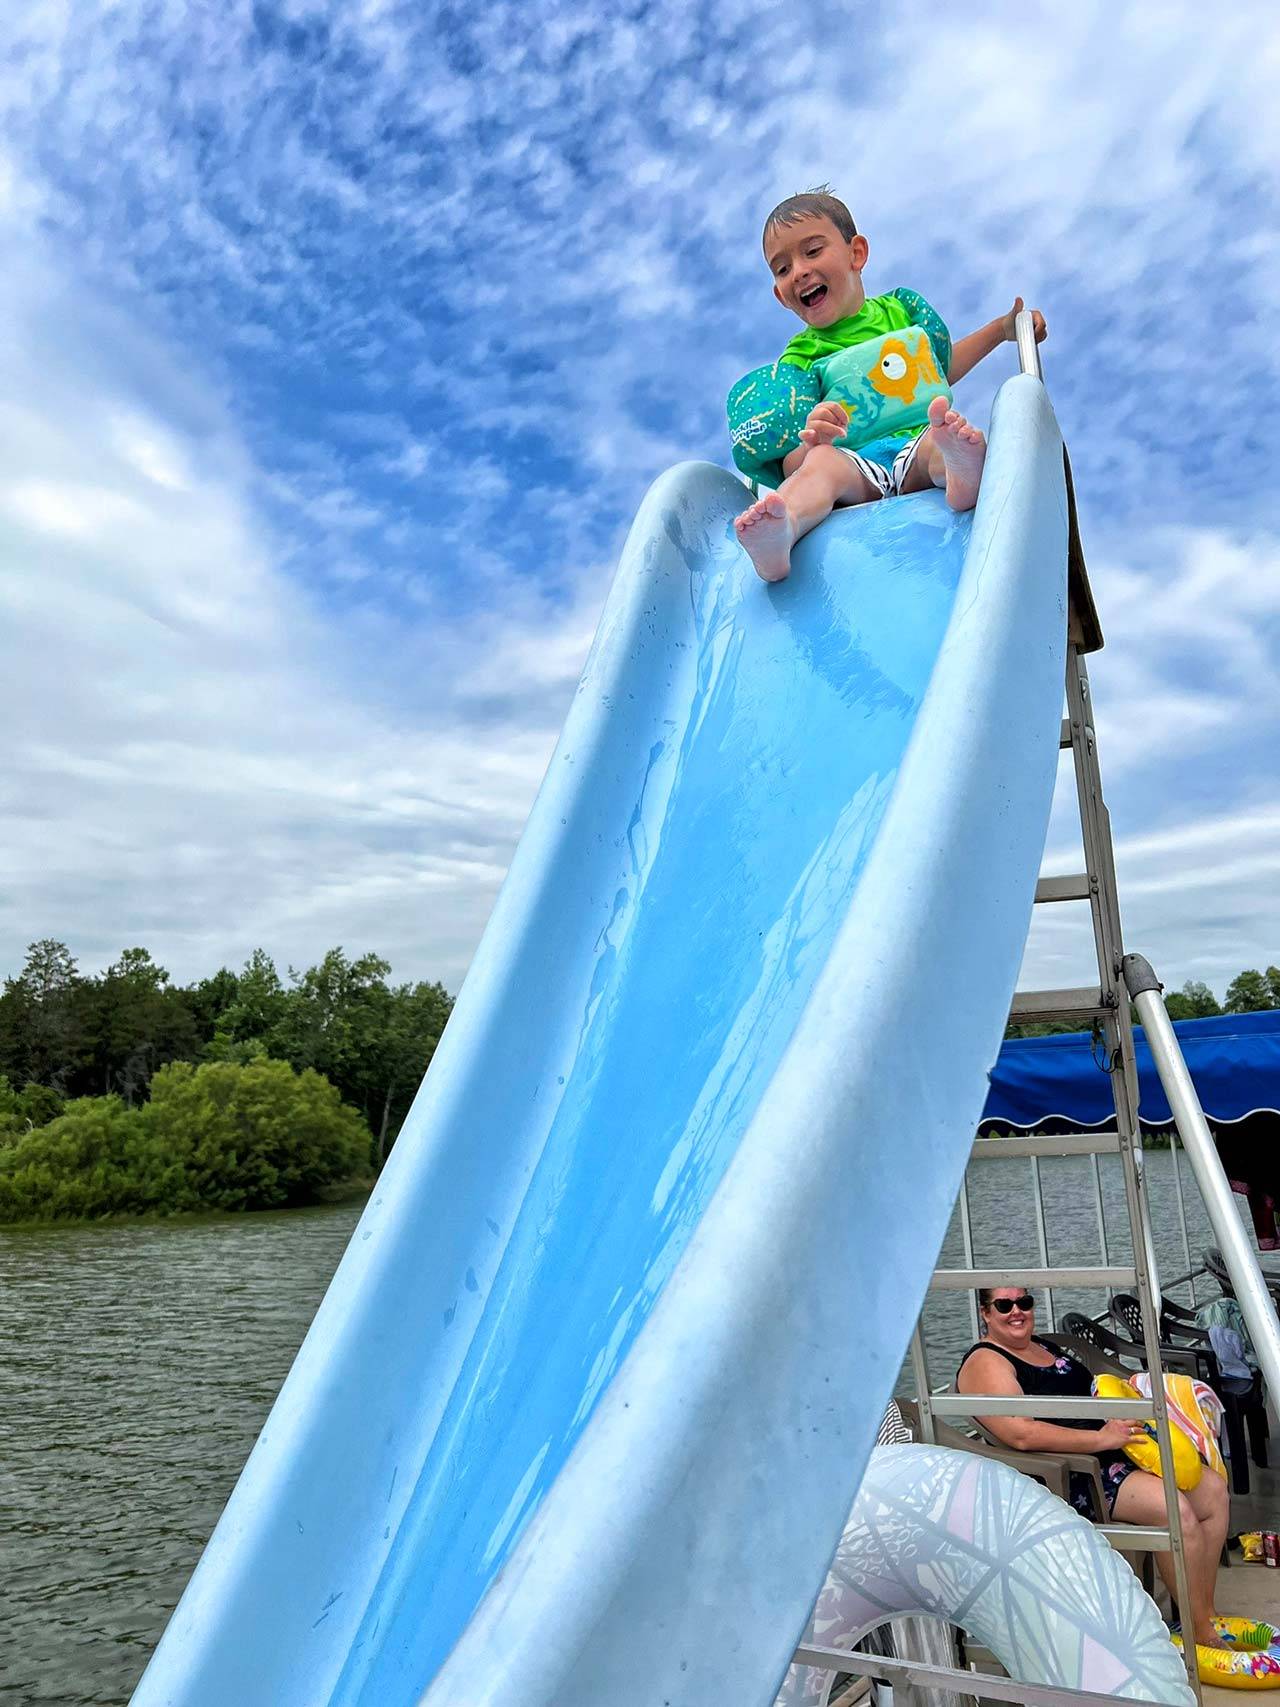 Boy sitting at the top of a waterslide wearing a puddlejumper floatie.